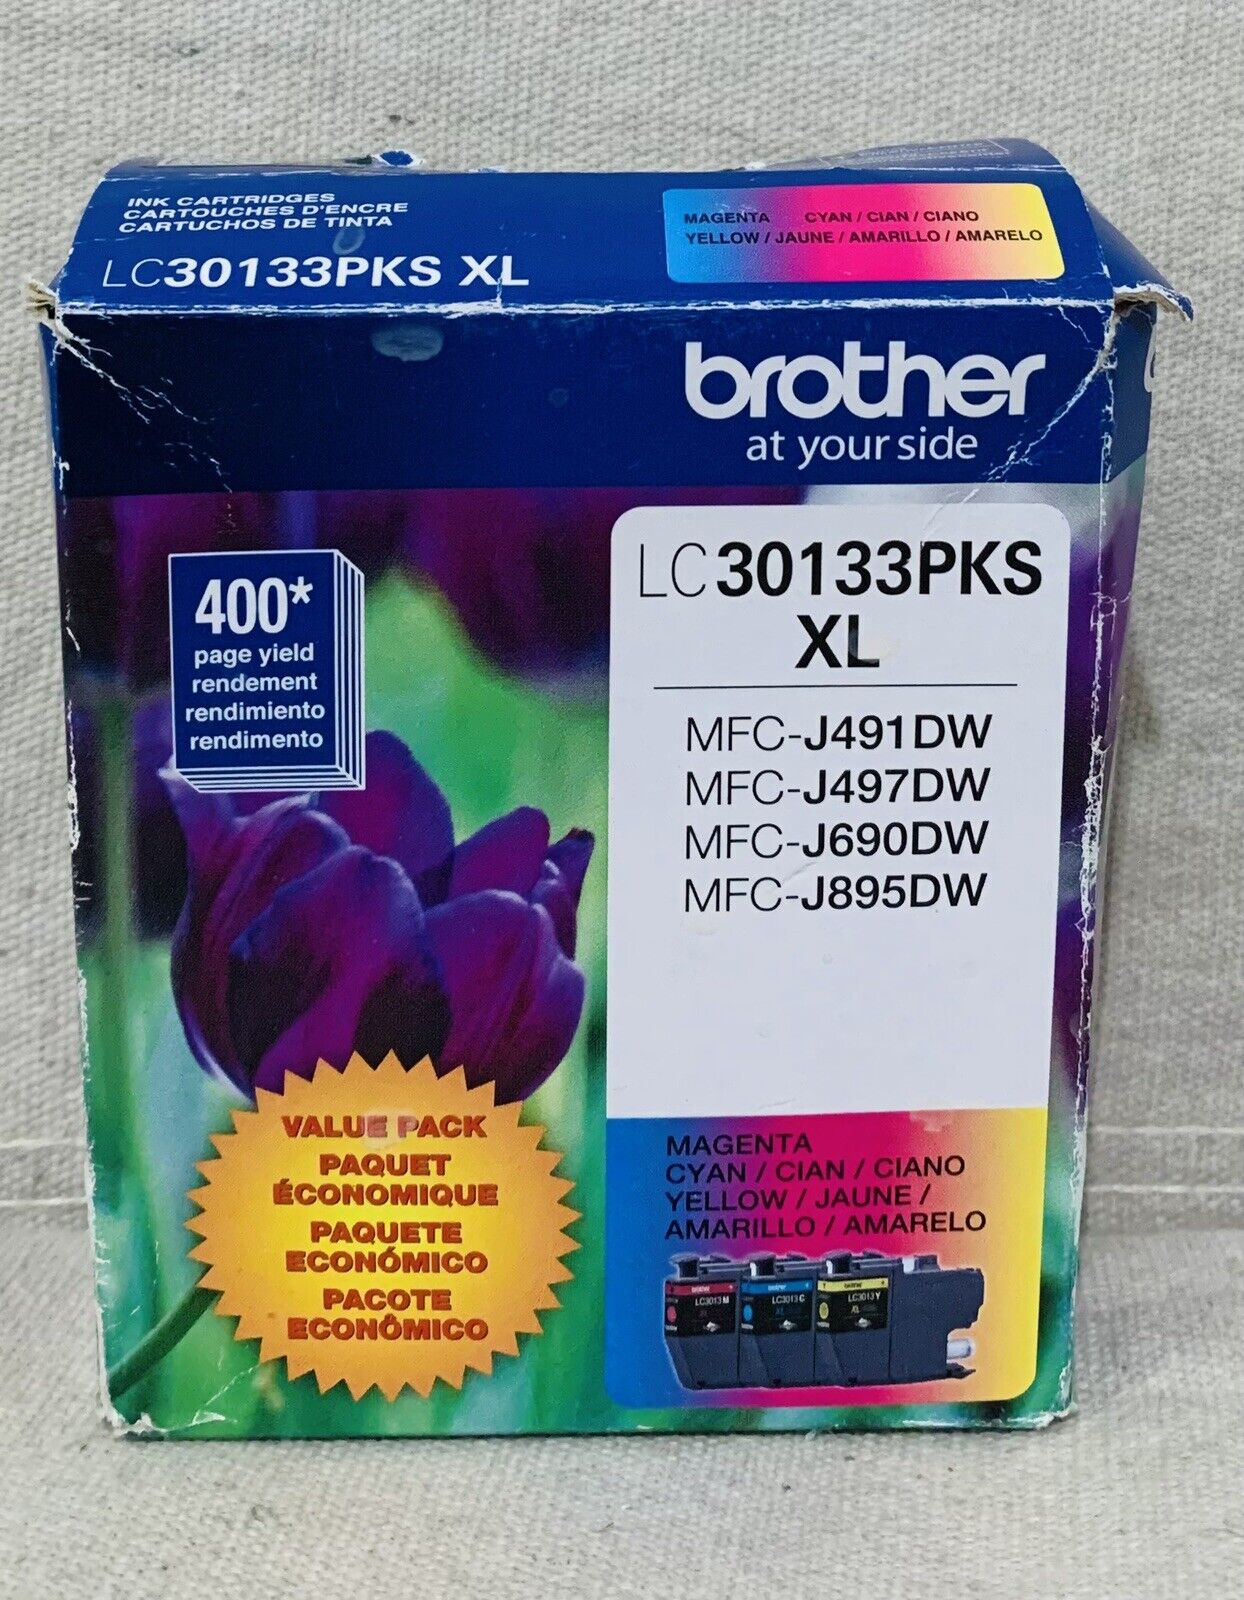 Brother LC30133PKS XL Cyan/Magenta/Yellow 3-Pack Ink Cartridges Expires 1/23 New